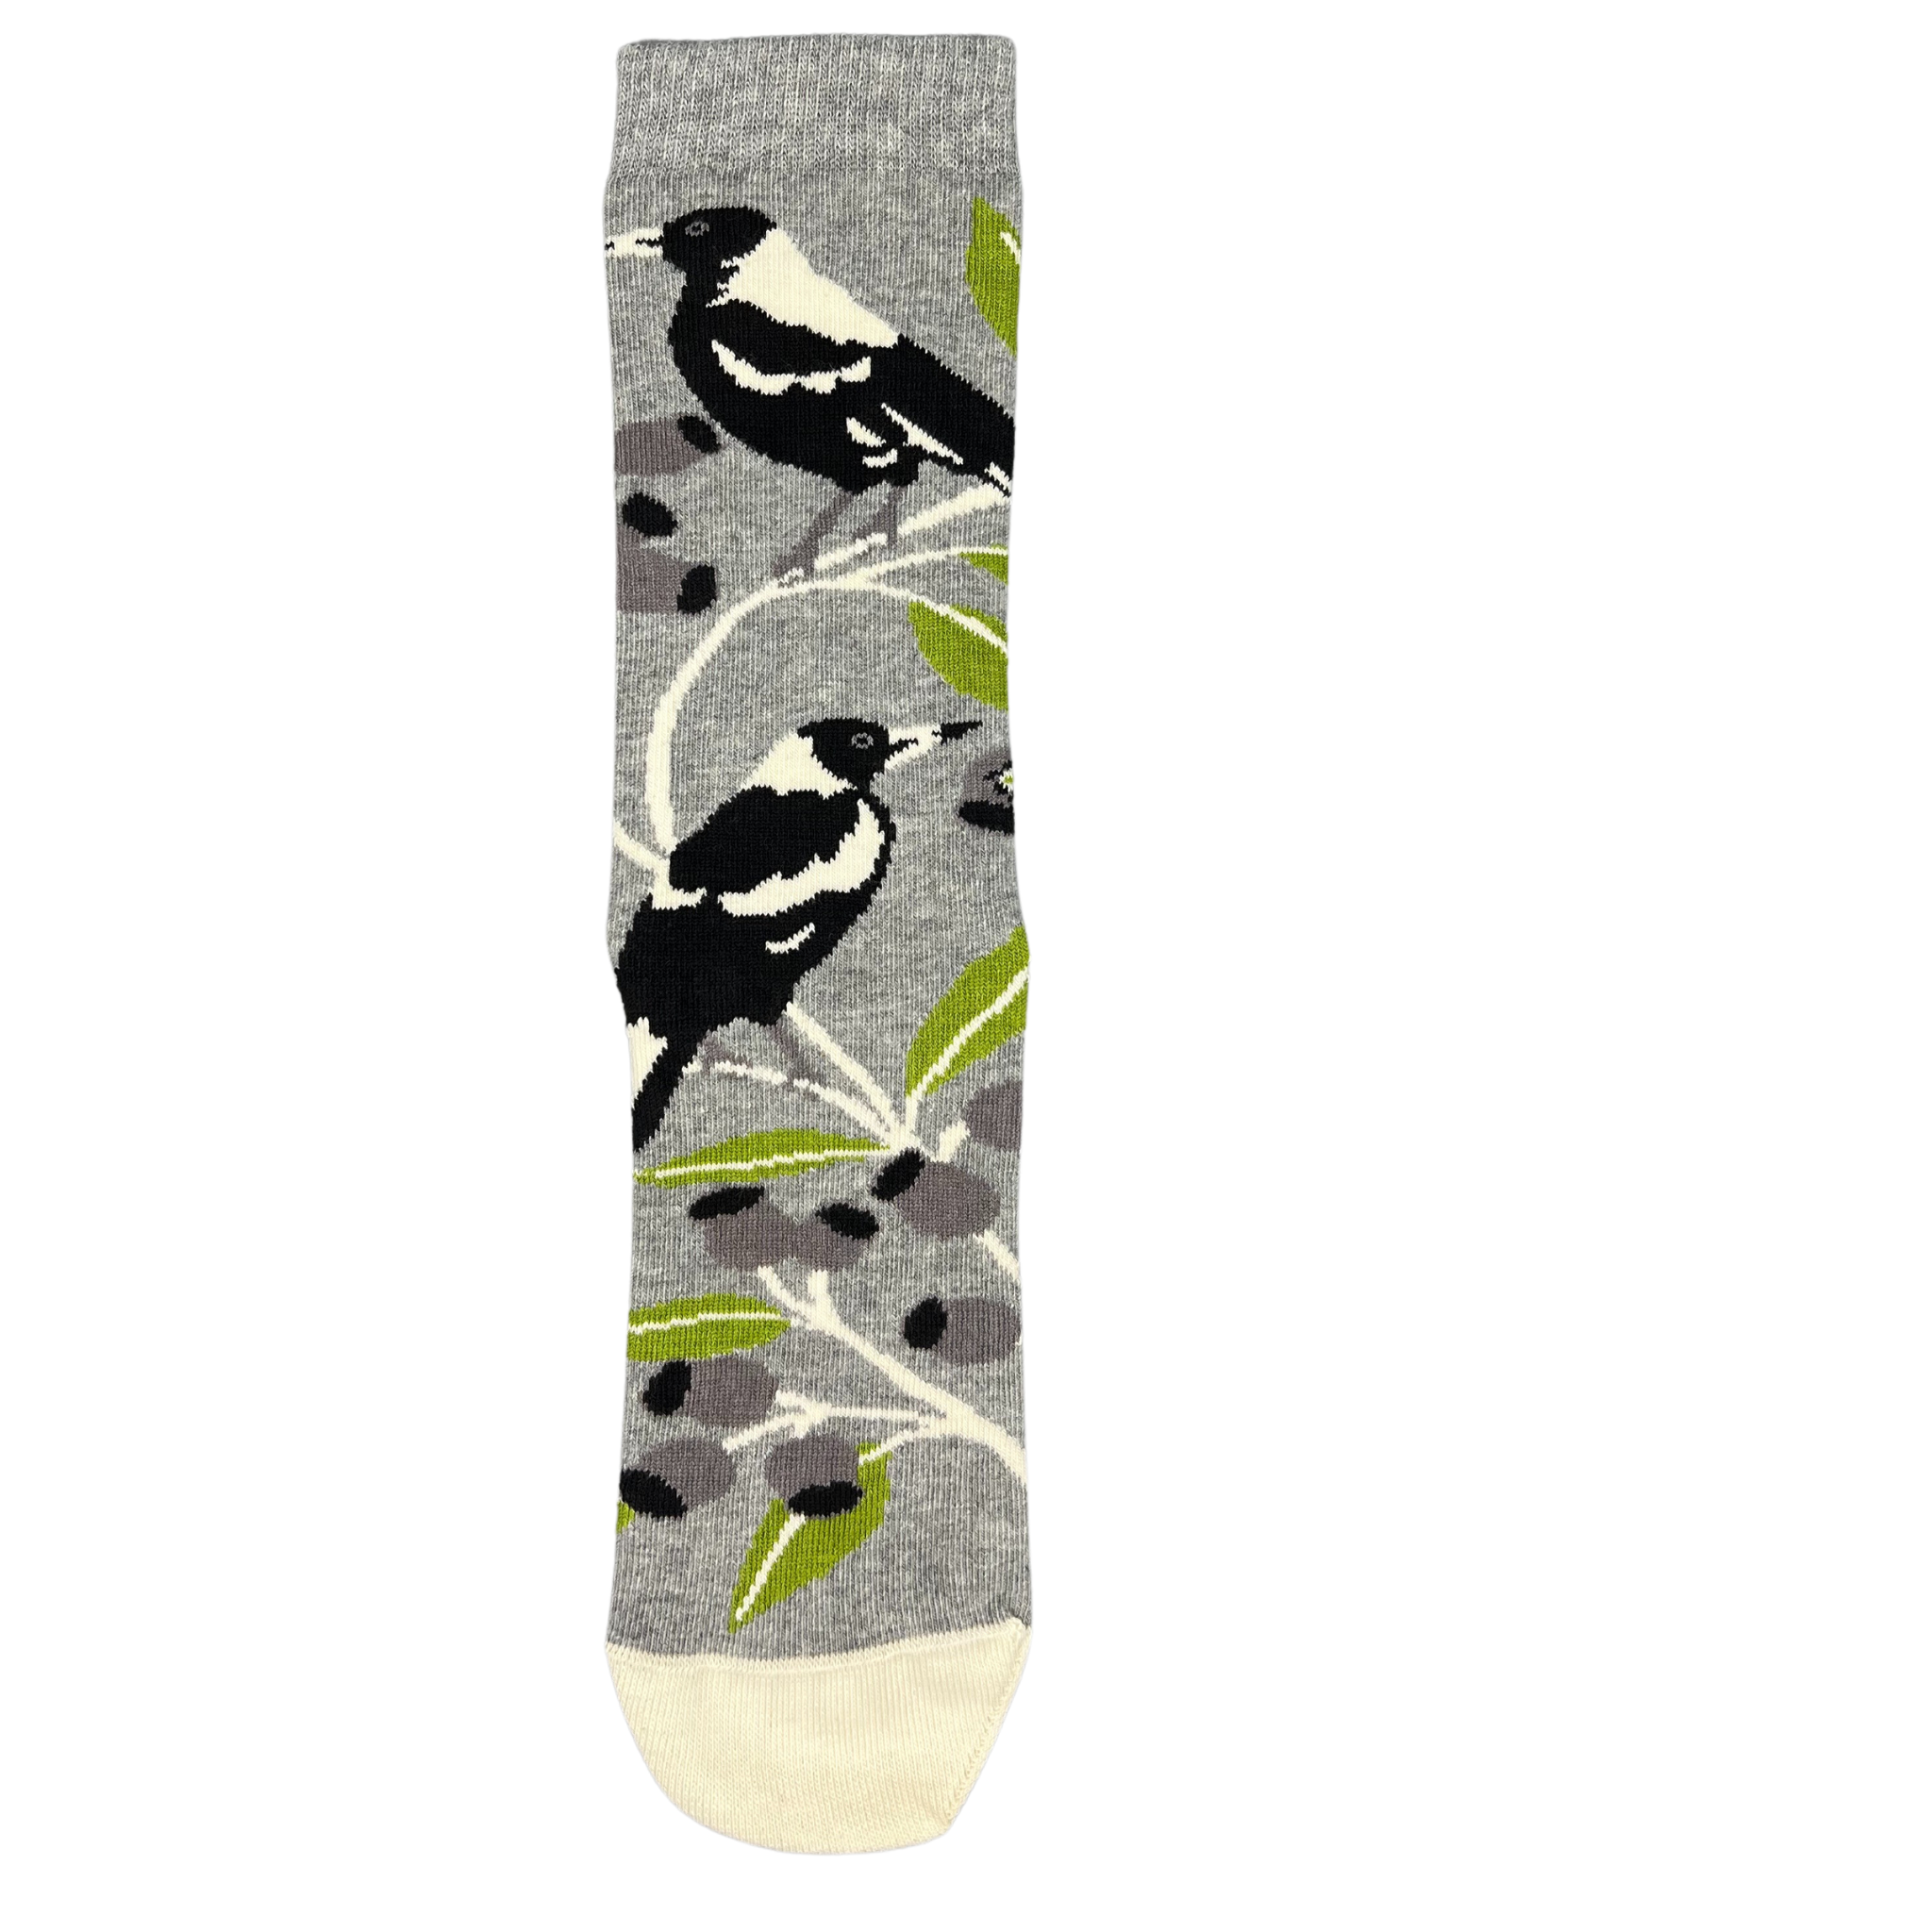 Two Australian Magpies on a light grey sock - The Sockery